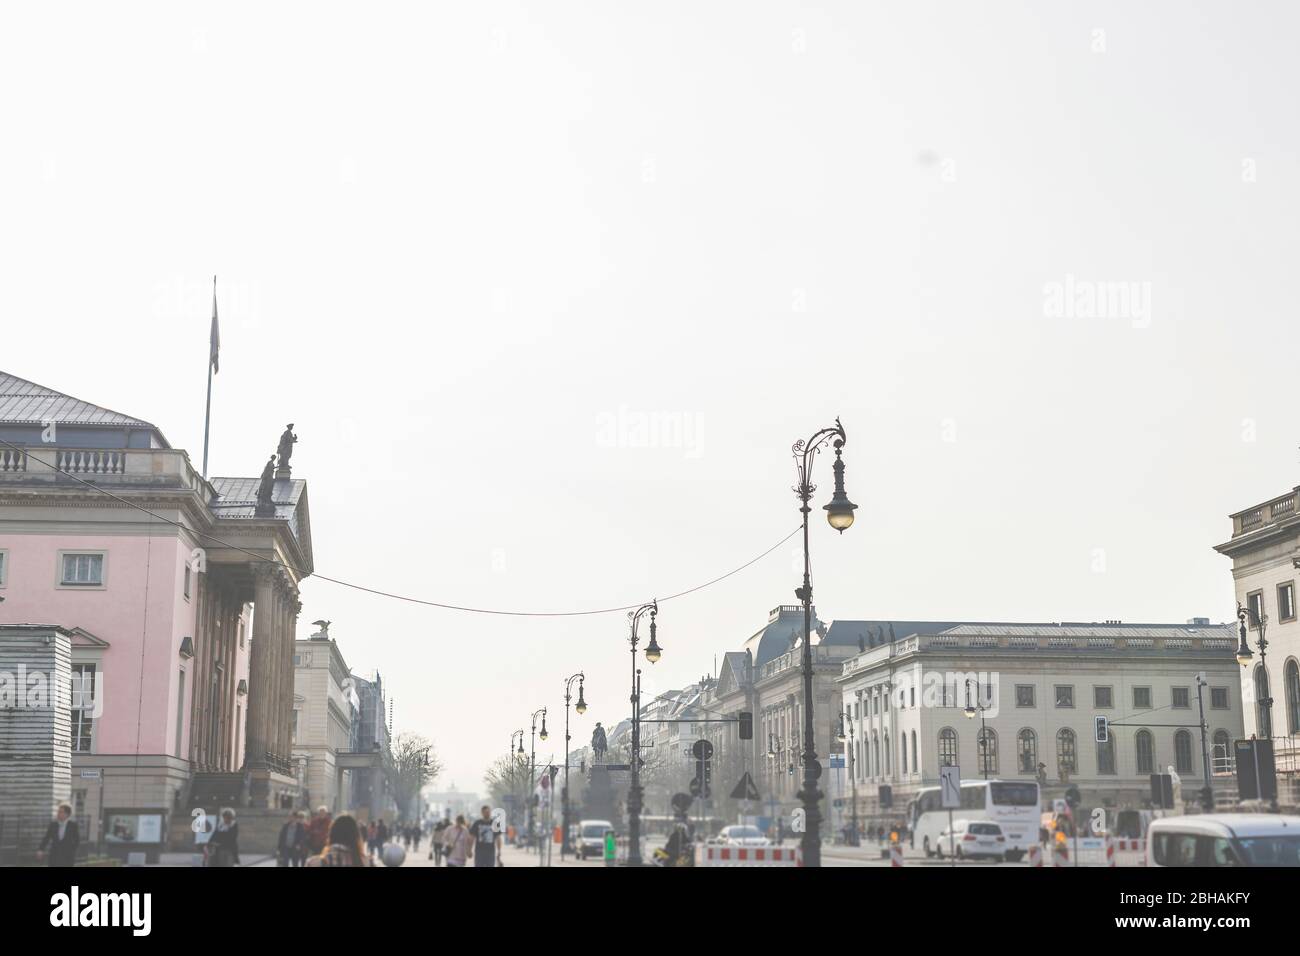 Berlin Boulevard Unter den Linden: Ornate street lamps at the height of the German State Opera. Stock Photo